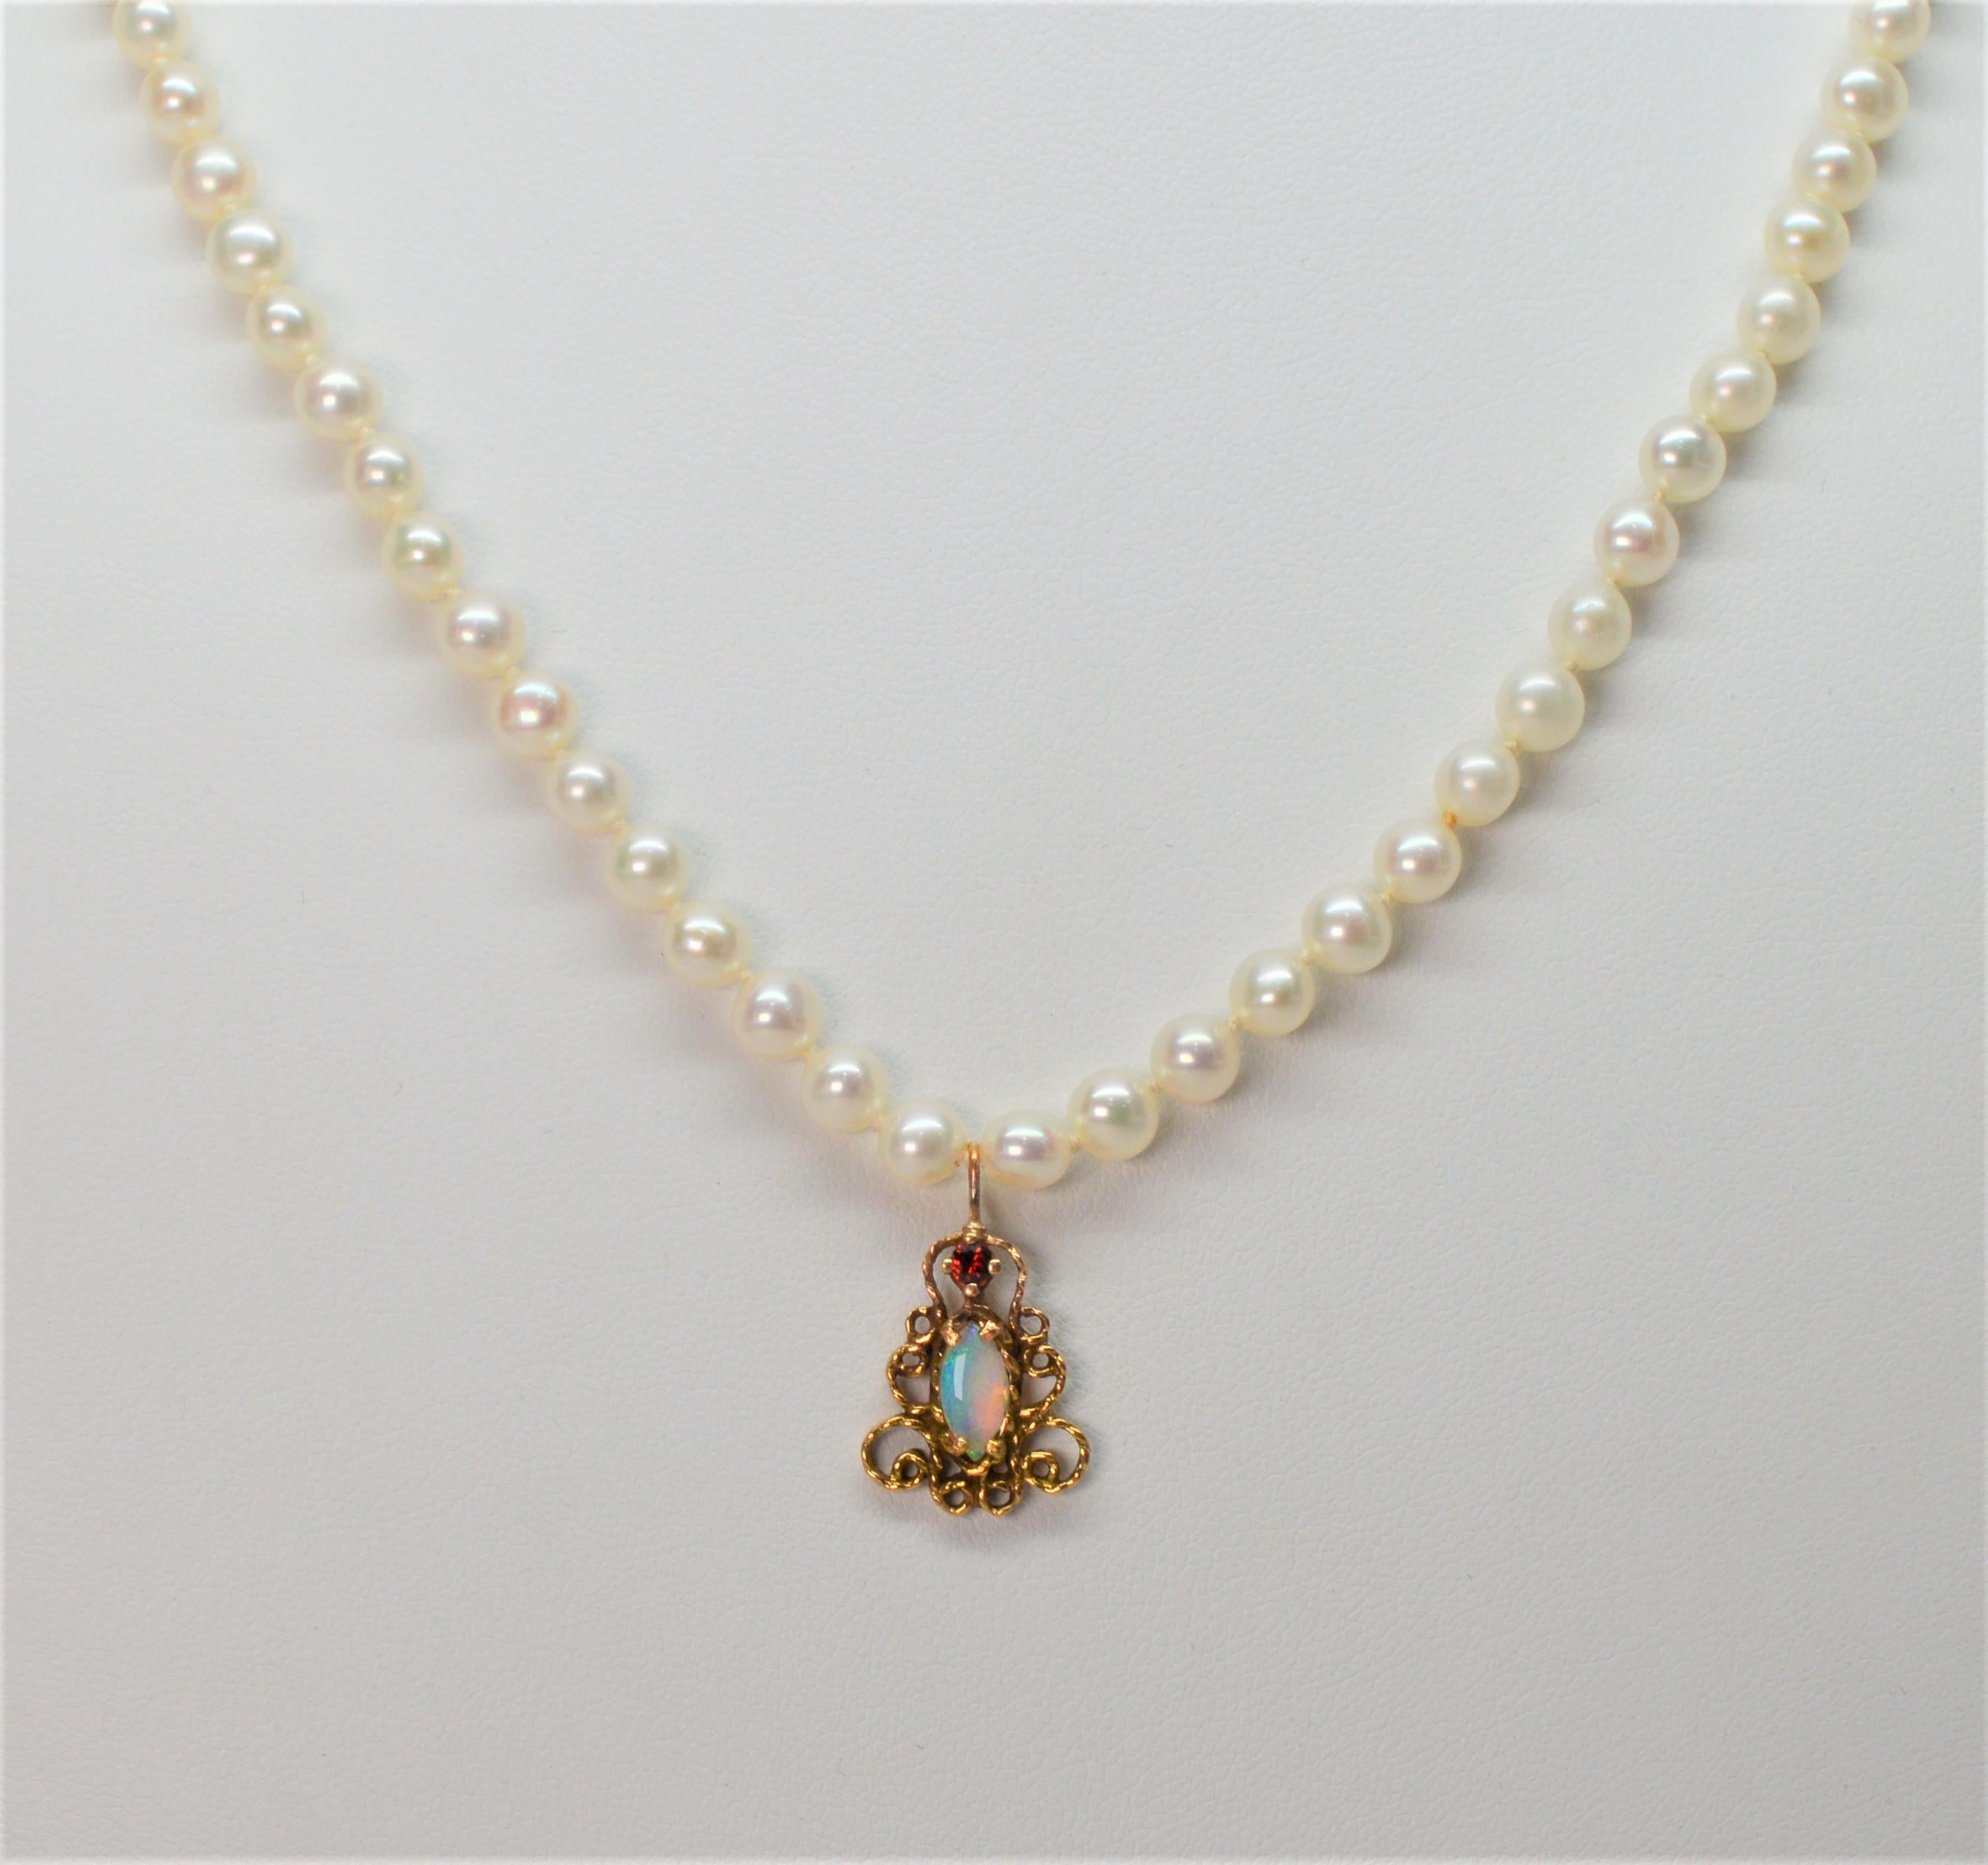 Women's Antique-Style Opal Ruby Yellow Gold Charm Pendant on Pearl Necklace